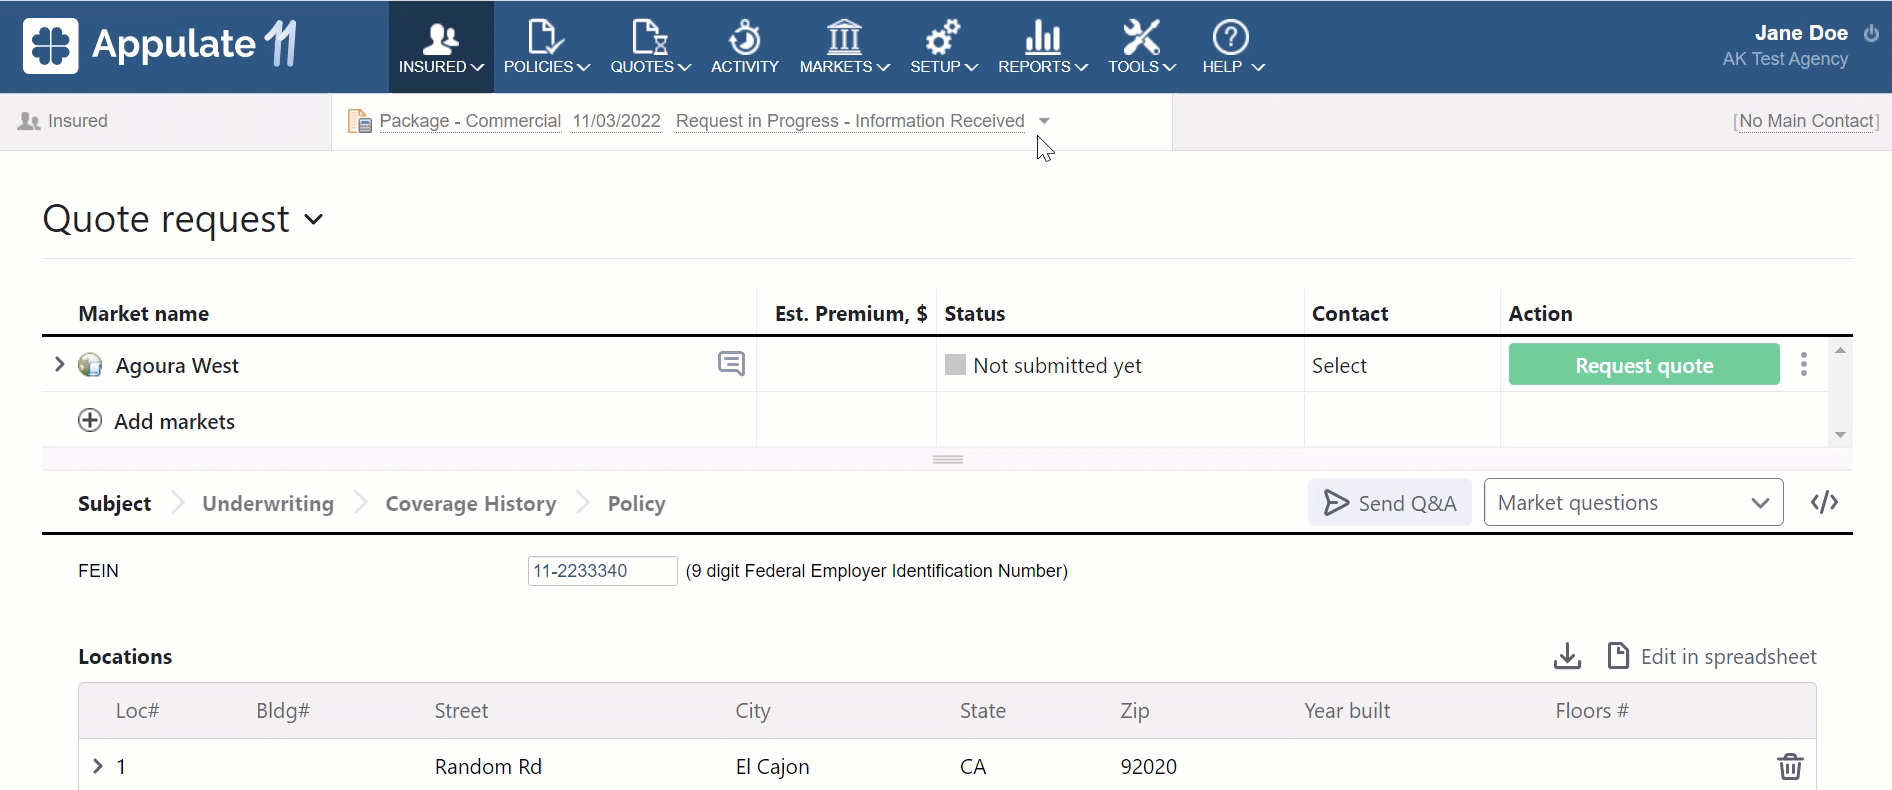 Create new request for quote or policy tab (existing insured)